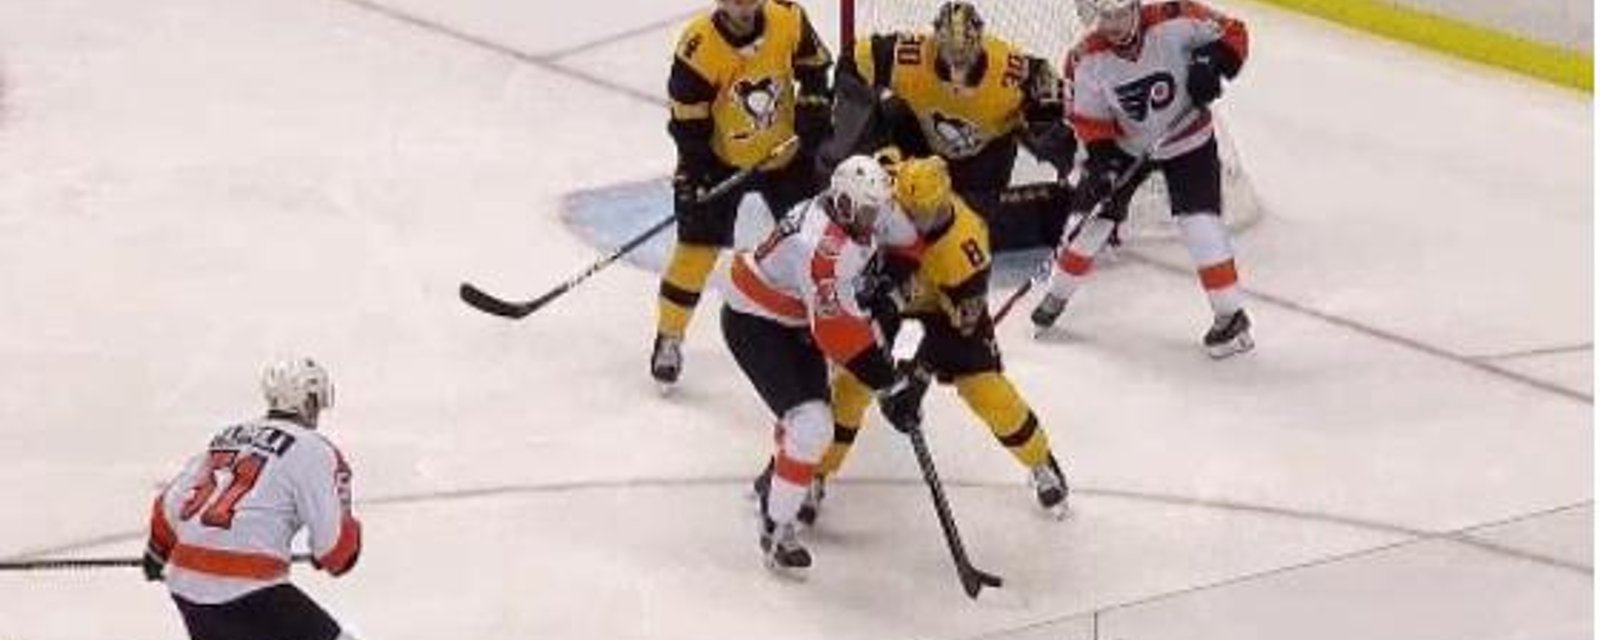 Simmonds goes for the head on savage play. 